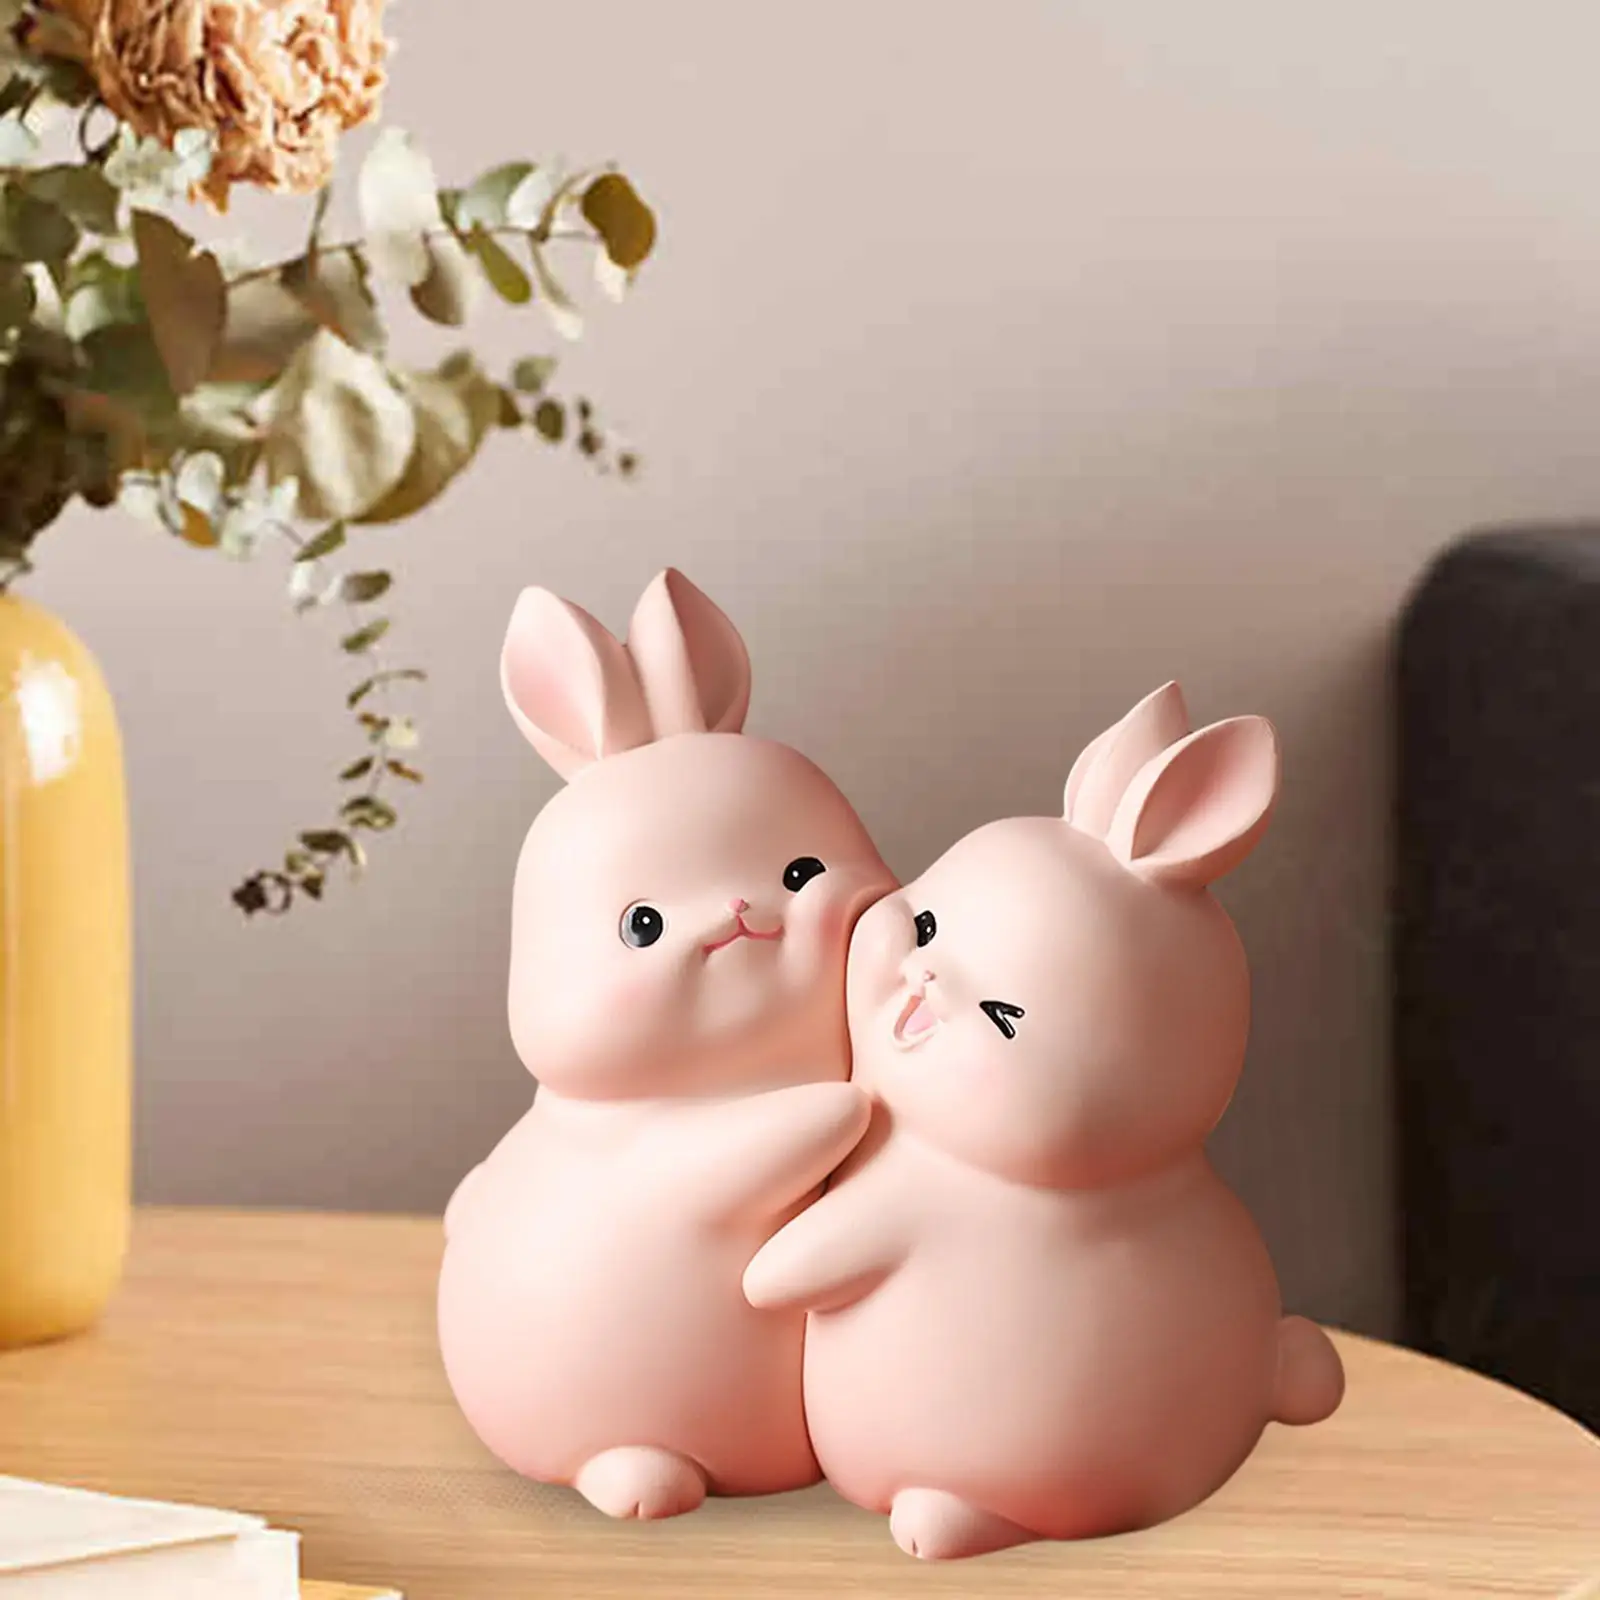 Rabbit Bookends Resin Figurines Modern Statues Bunny Book Ends Book Ends to Hold Books for Shelves Cabinet Kids Rooms Desk Decor